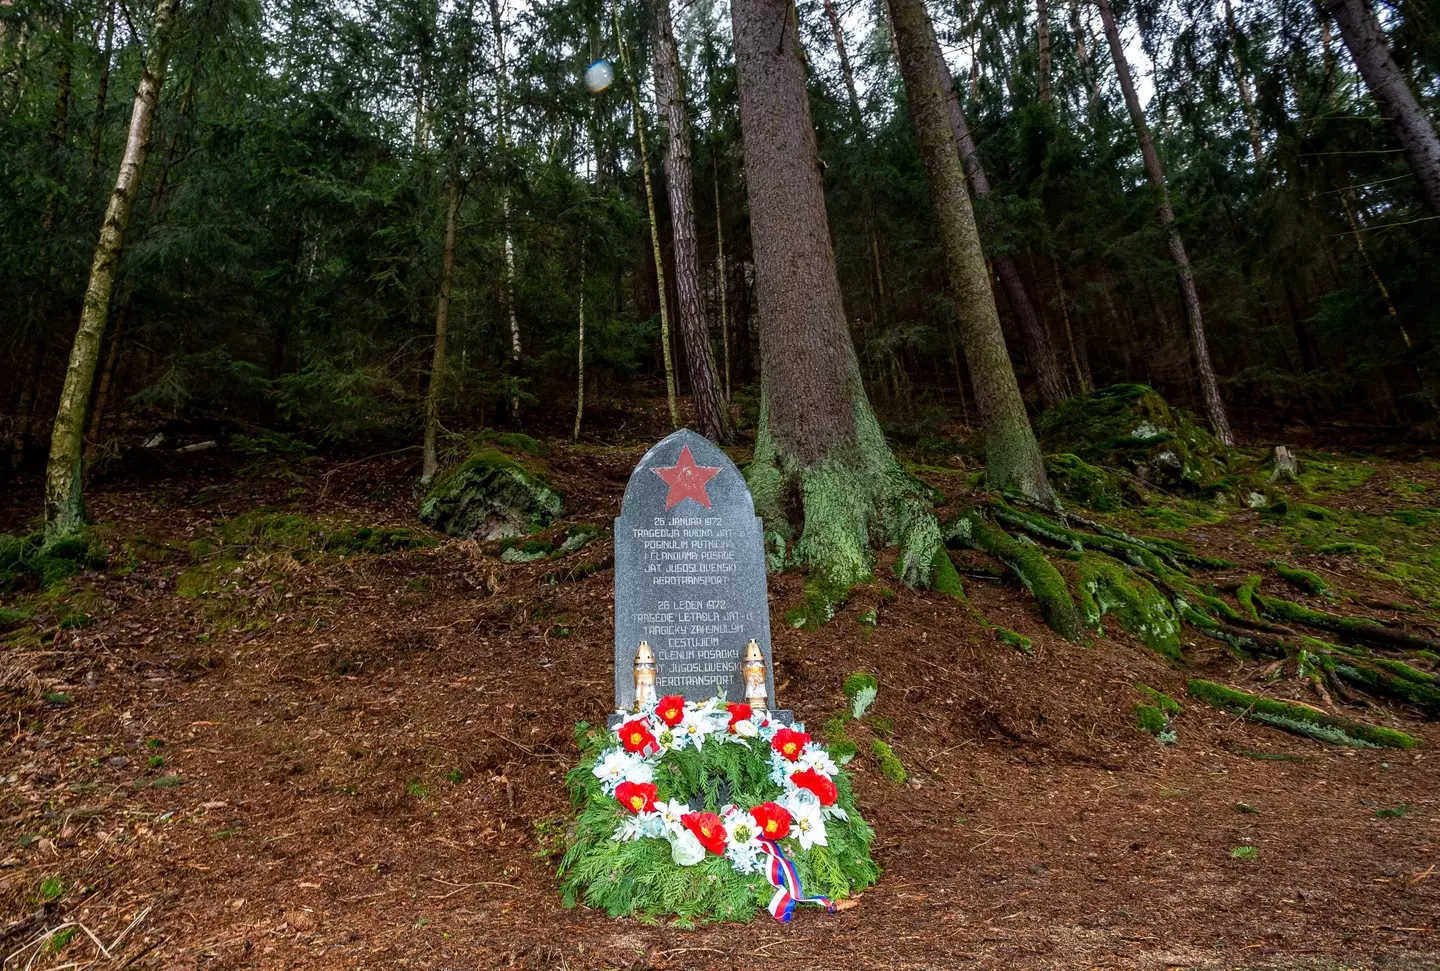 A memorial at the site of the plane crash in Czech Republic.